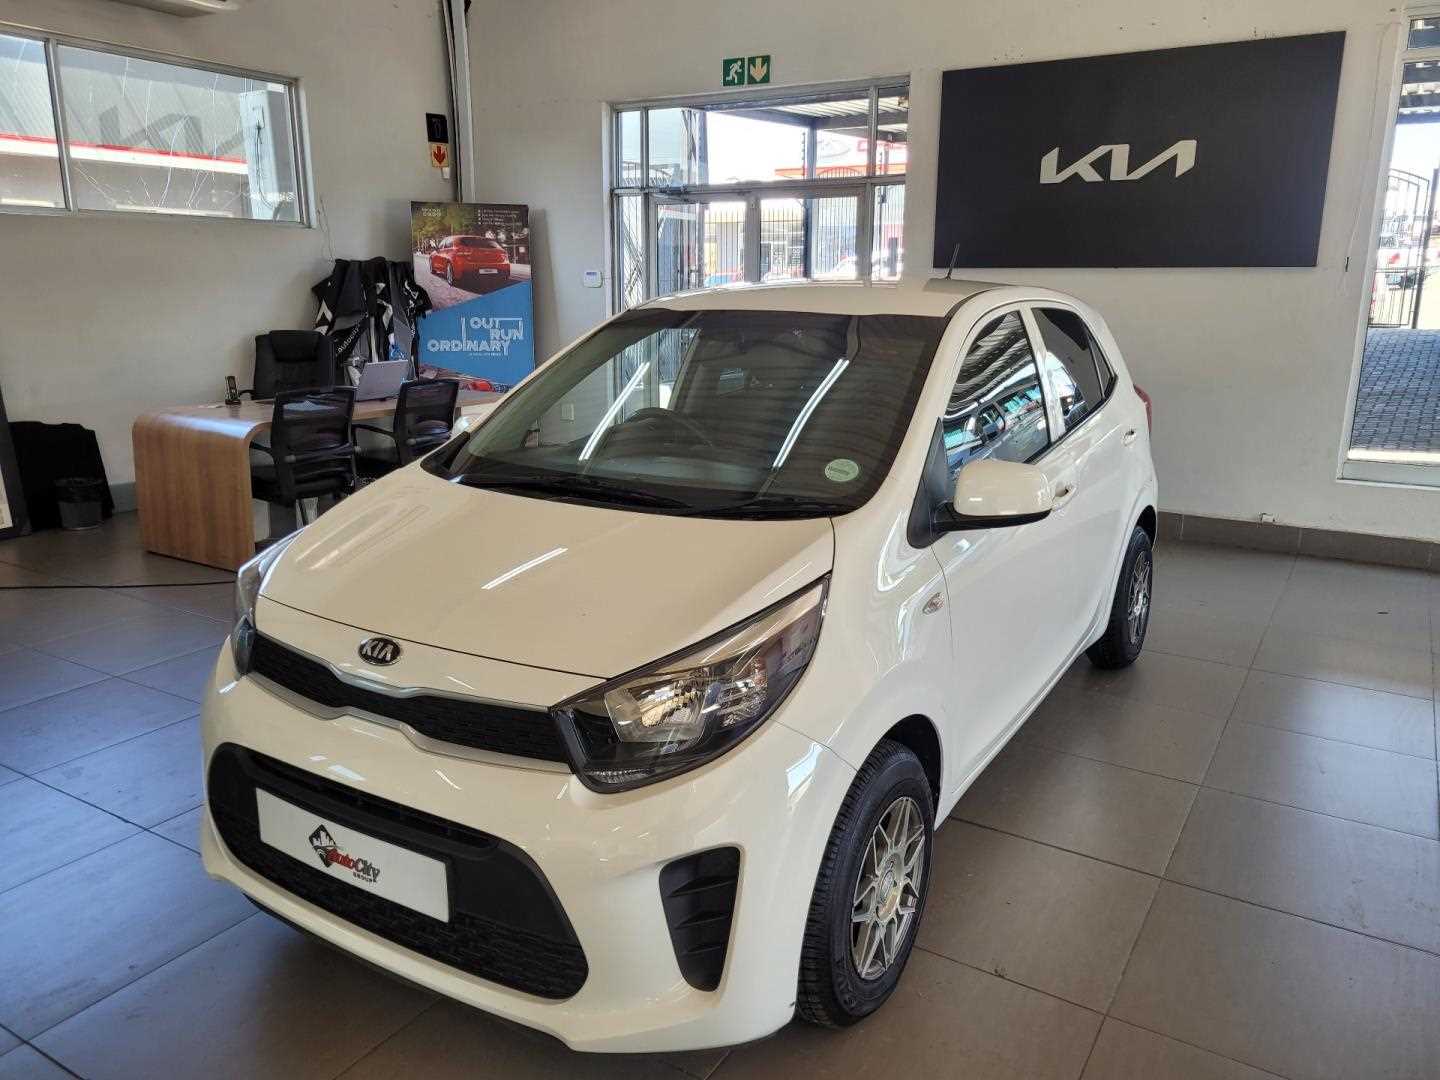 KIA PICANTO 1.0 RUNNER F/C P/V for Sale in South Africa